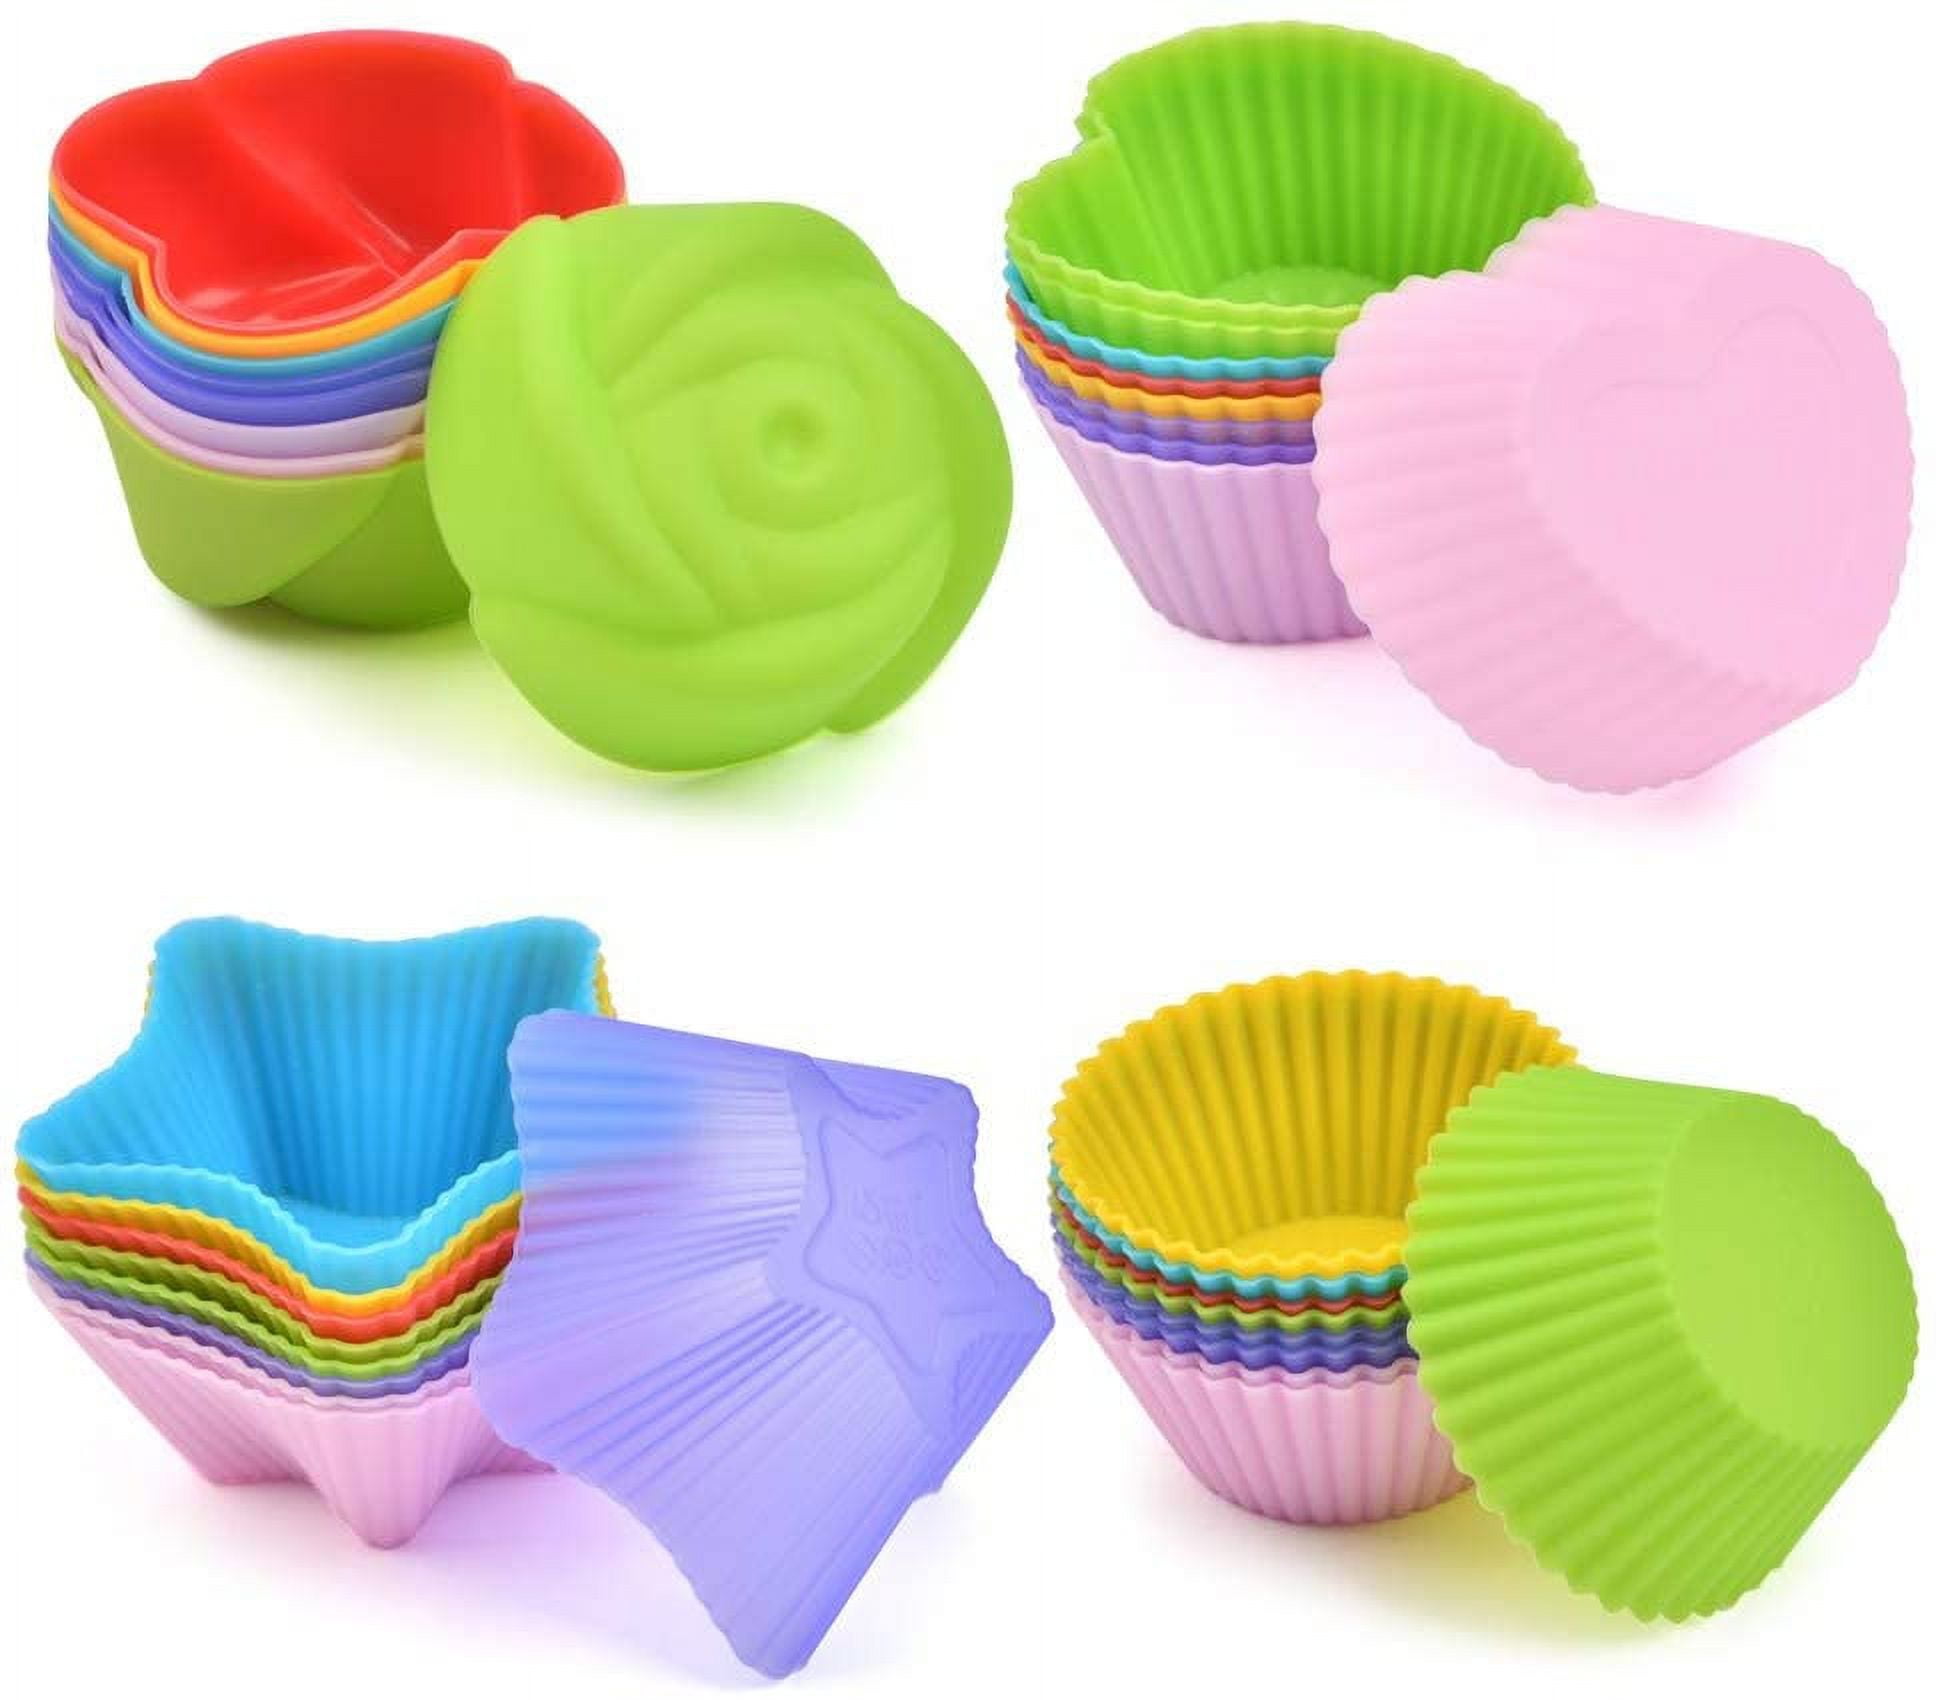 10 7cm Round Muffin Cup Rice Cake Mold Baking Mold Silicone Muffin Cup Cake  Cup